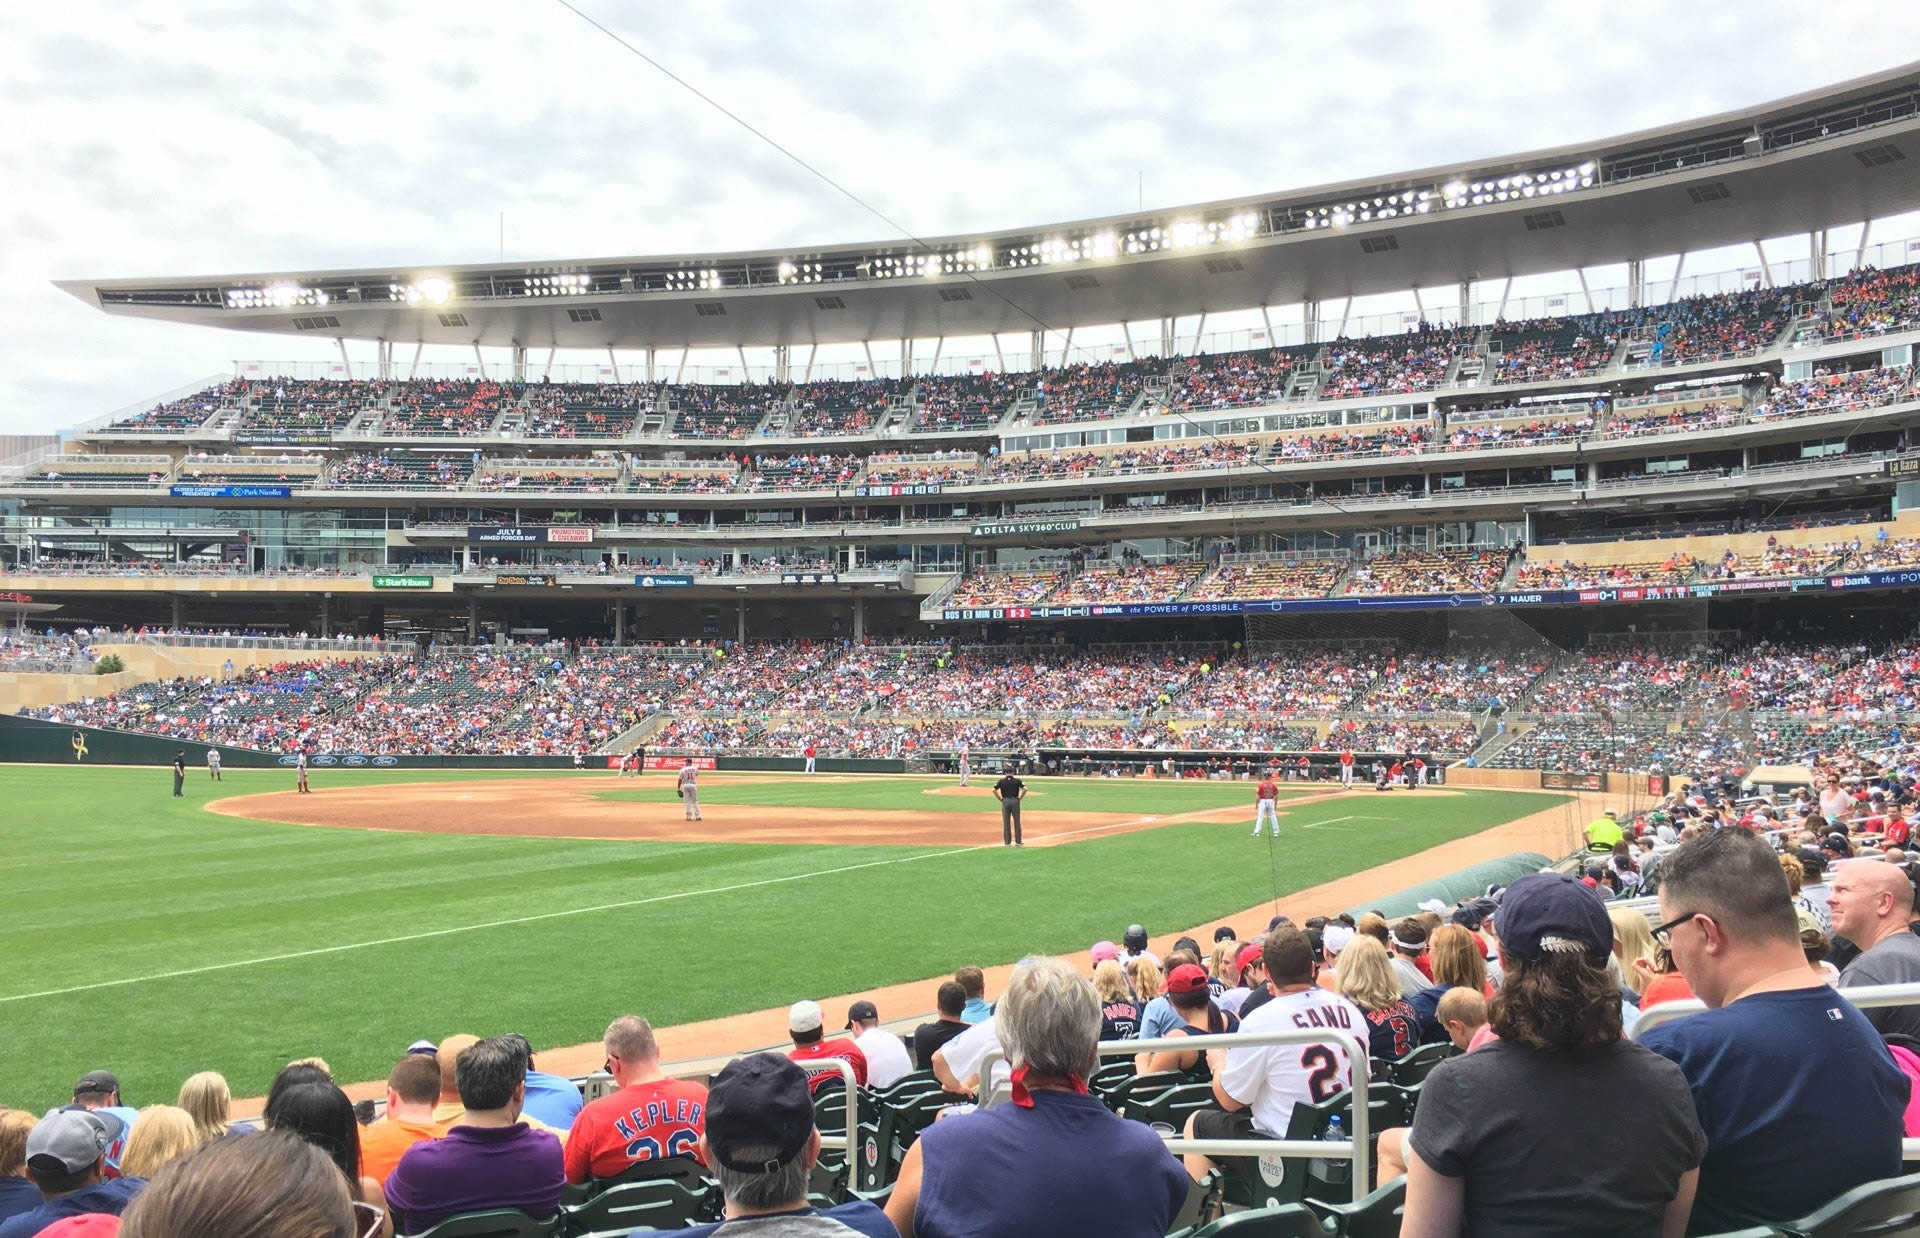 section 125, row 10 seat view  - target field